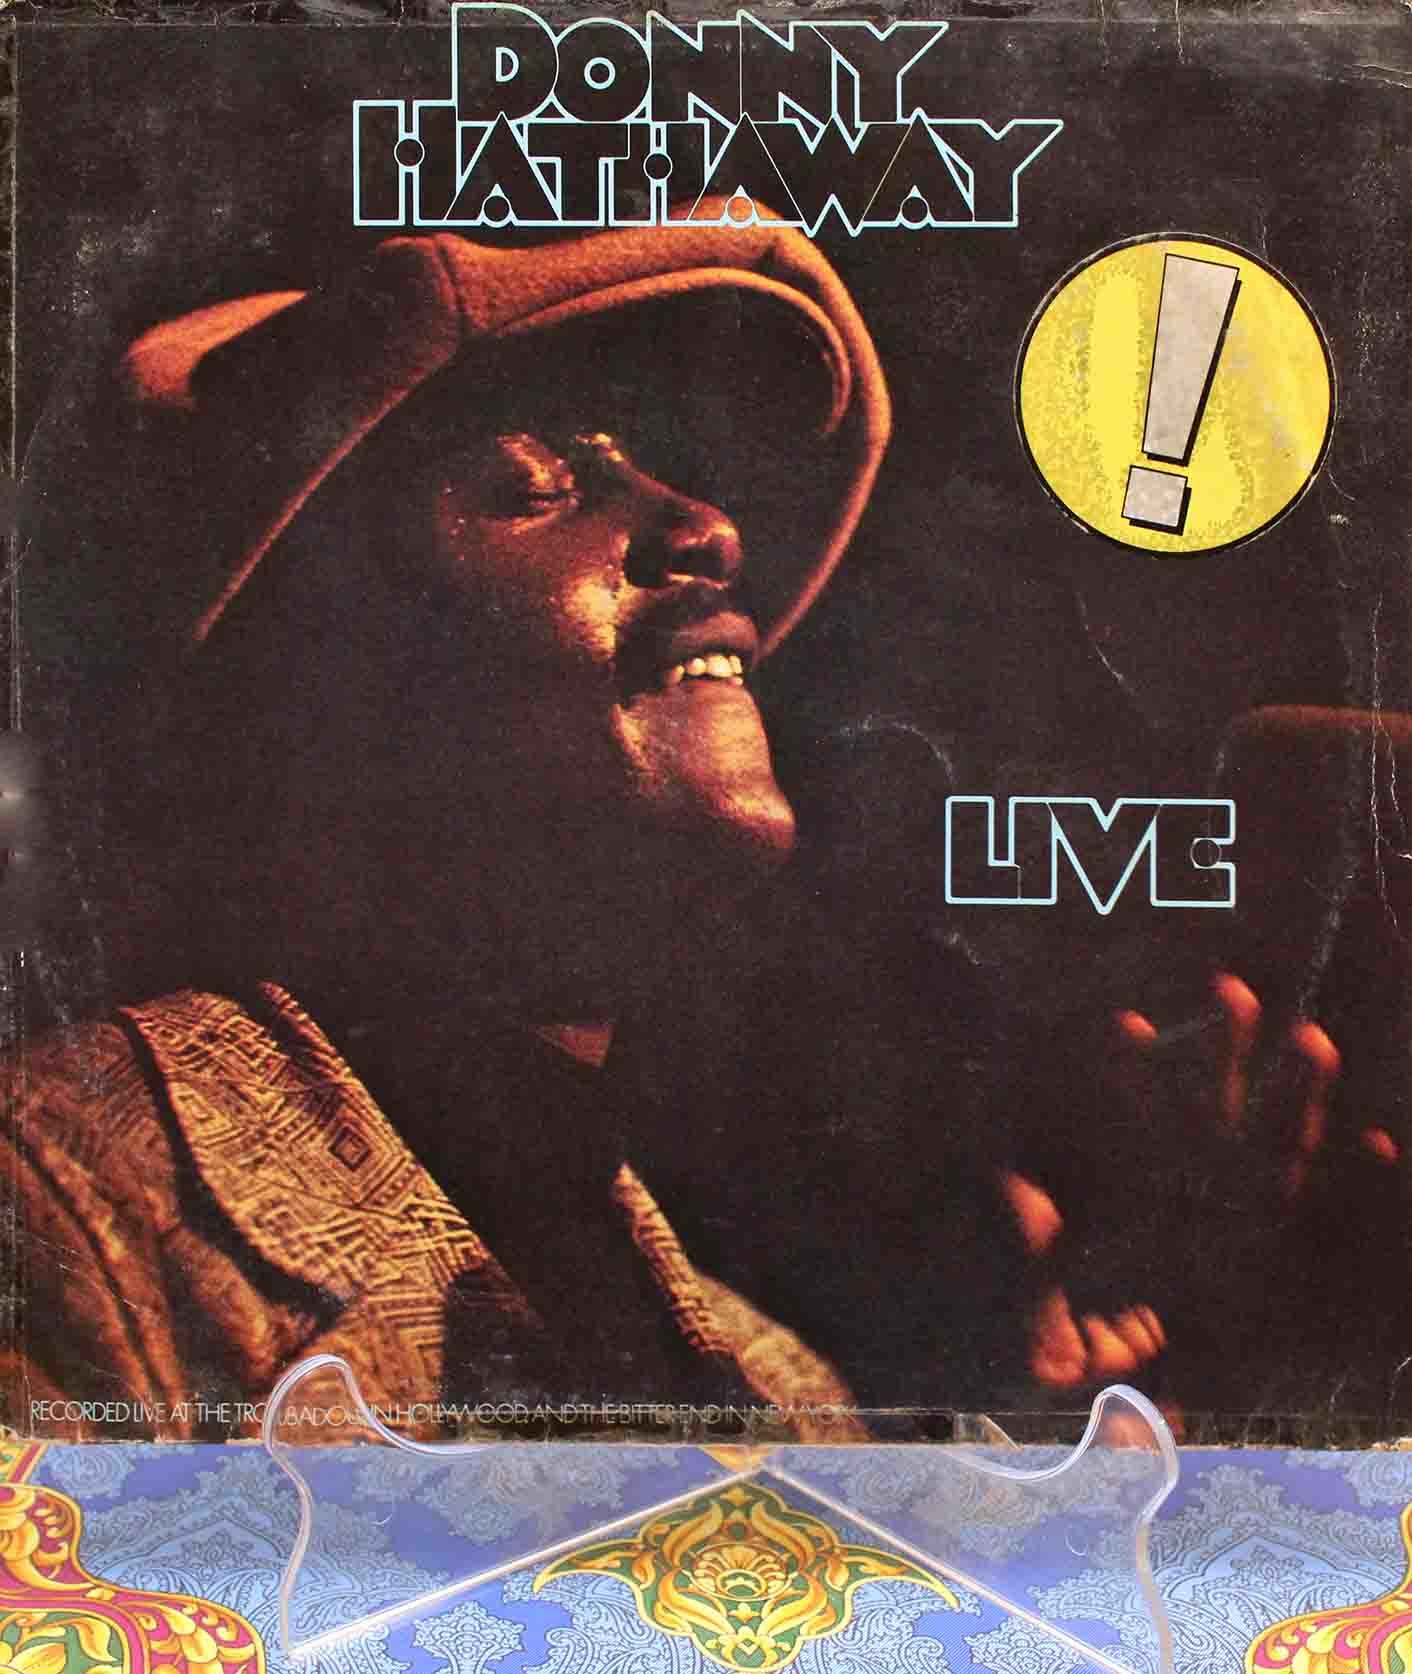 Donny Hathaway live 01